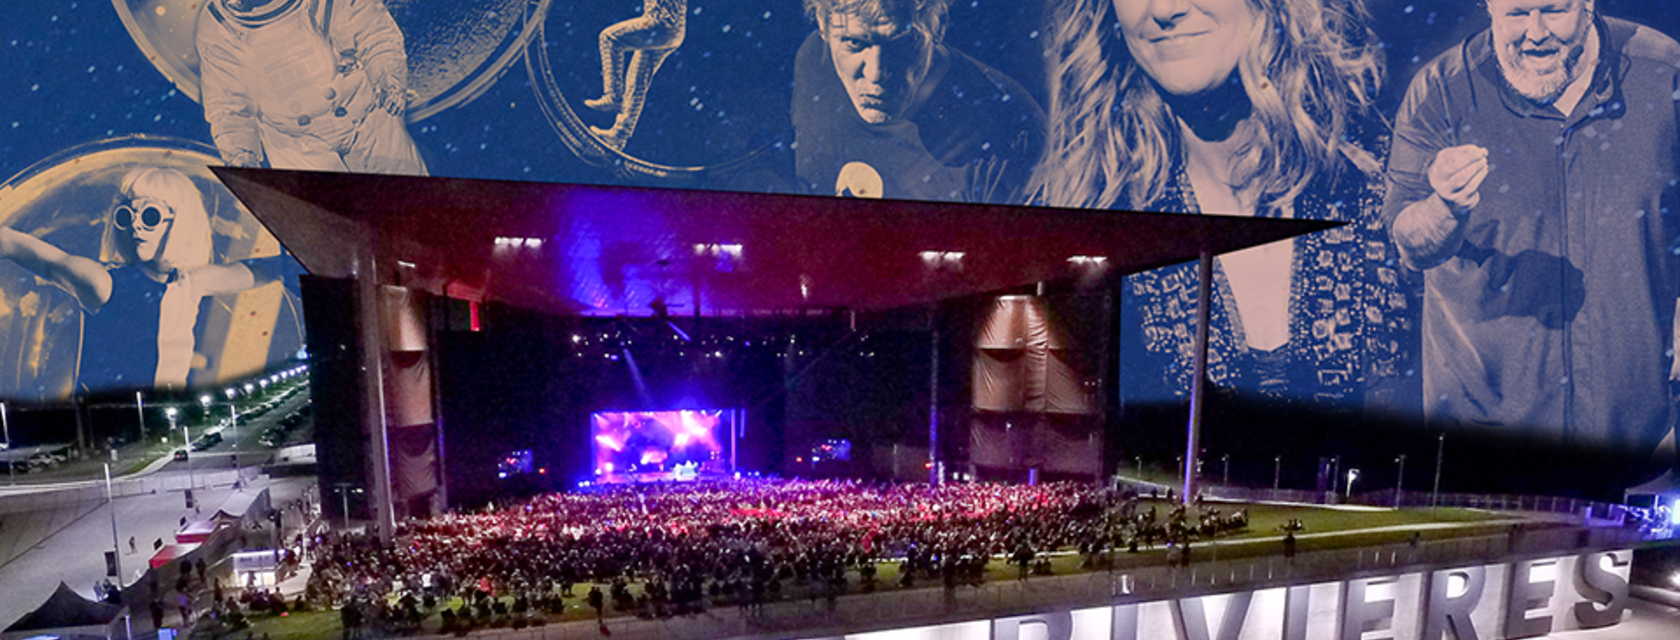 95,000 people visited the Cogeco Amphitheatre this summer